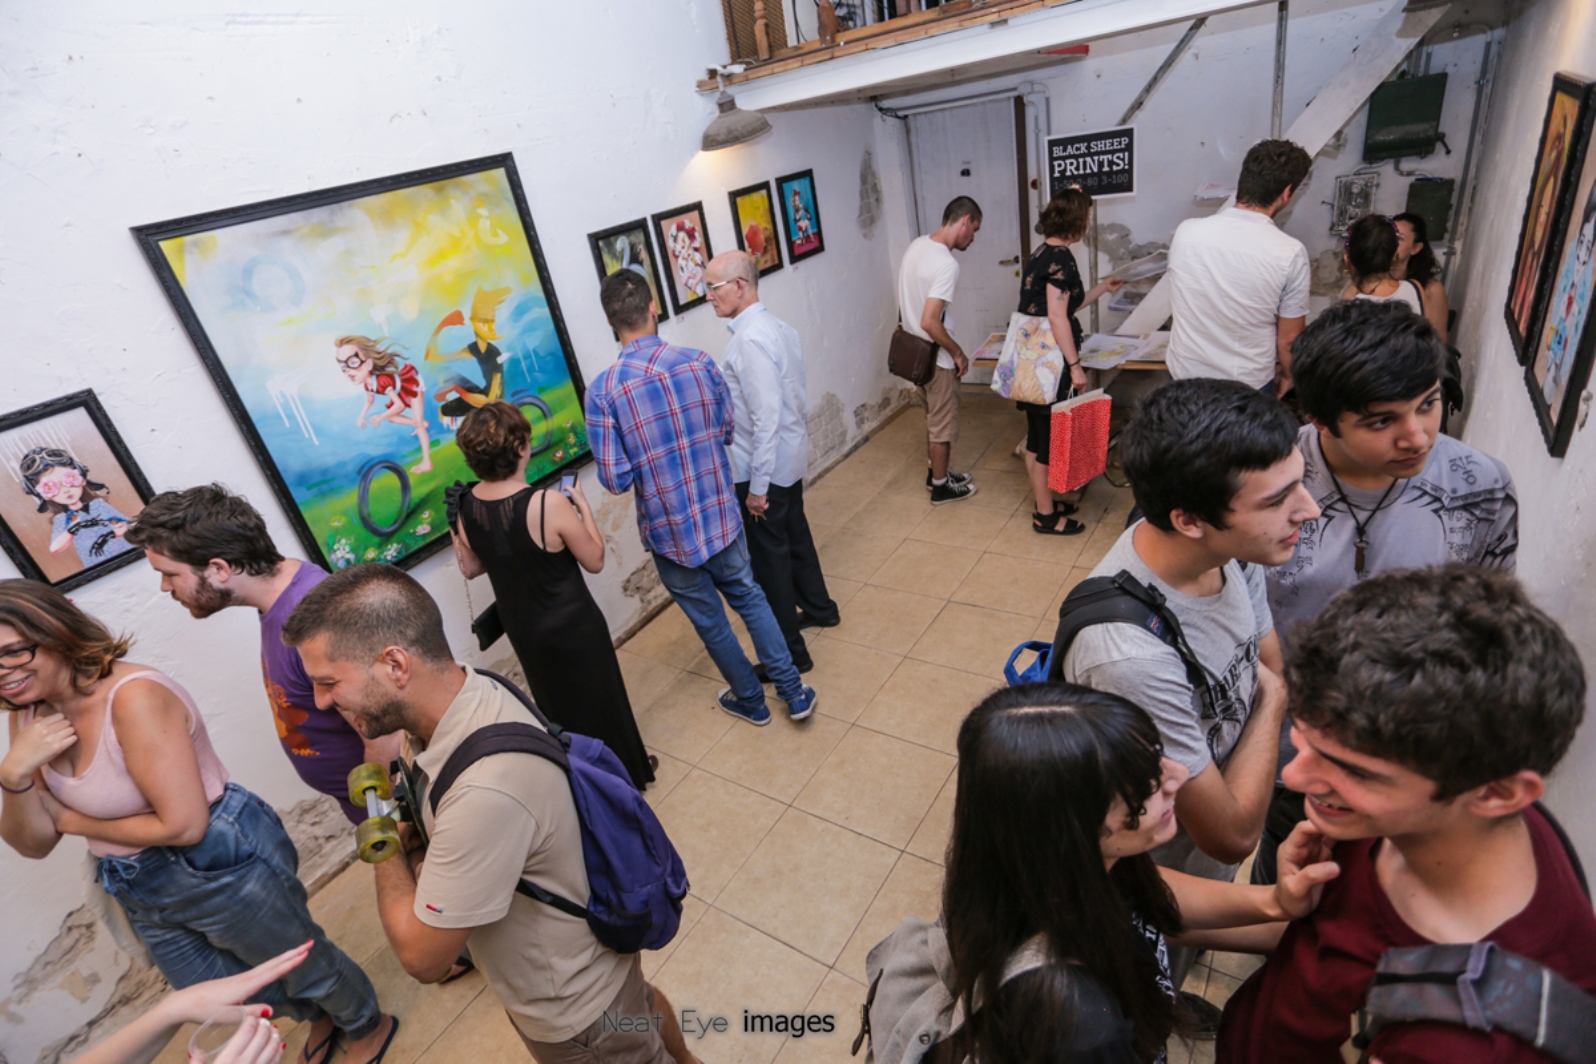 Patrons enjoying street artist Untay’s show at Meshuna Gallery in Florentin. Photo by Neat Eye Images